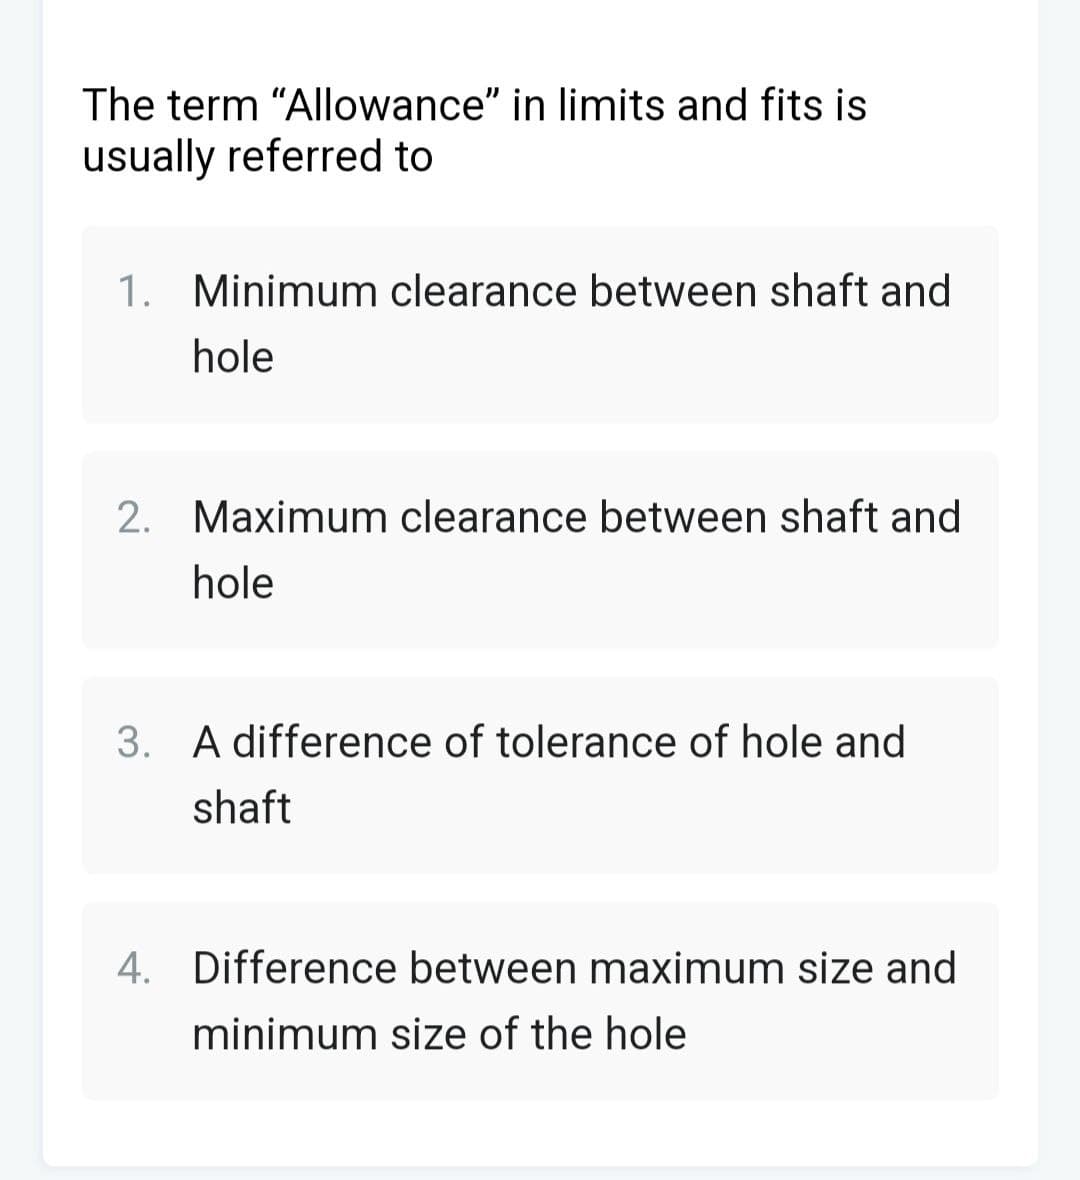 The term "Allowance" in limits and fits is
usually referred to
1. Minimum clearance between shaft and
hole
2. Maximum clearance between shaft and
hole
3. A difference of tolerance of hole and
shaft
4. Difference between maximum size and
minimum size of the hole